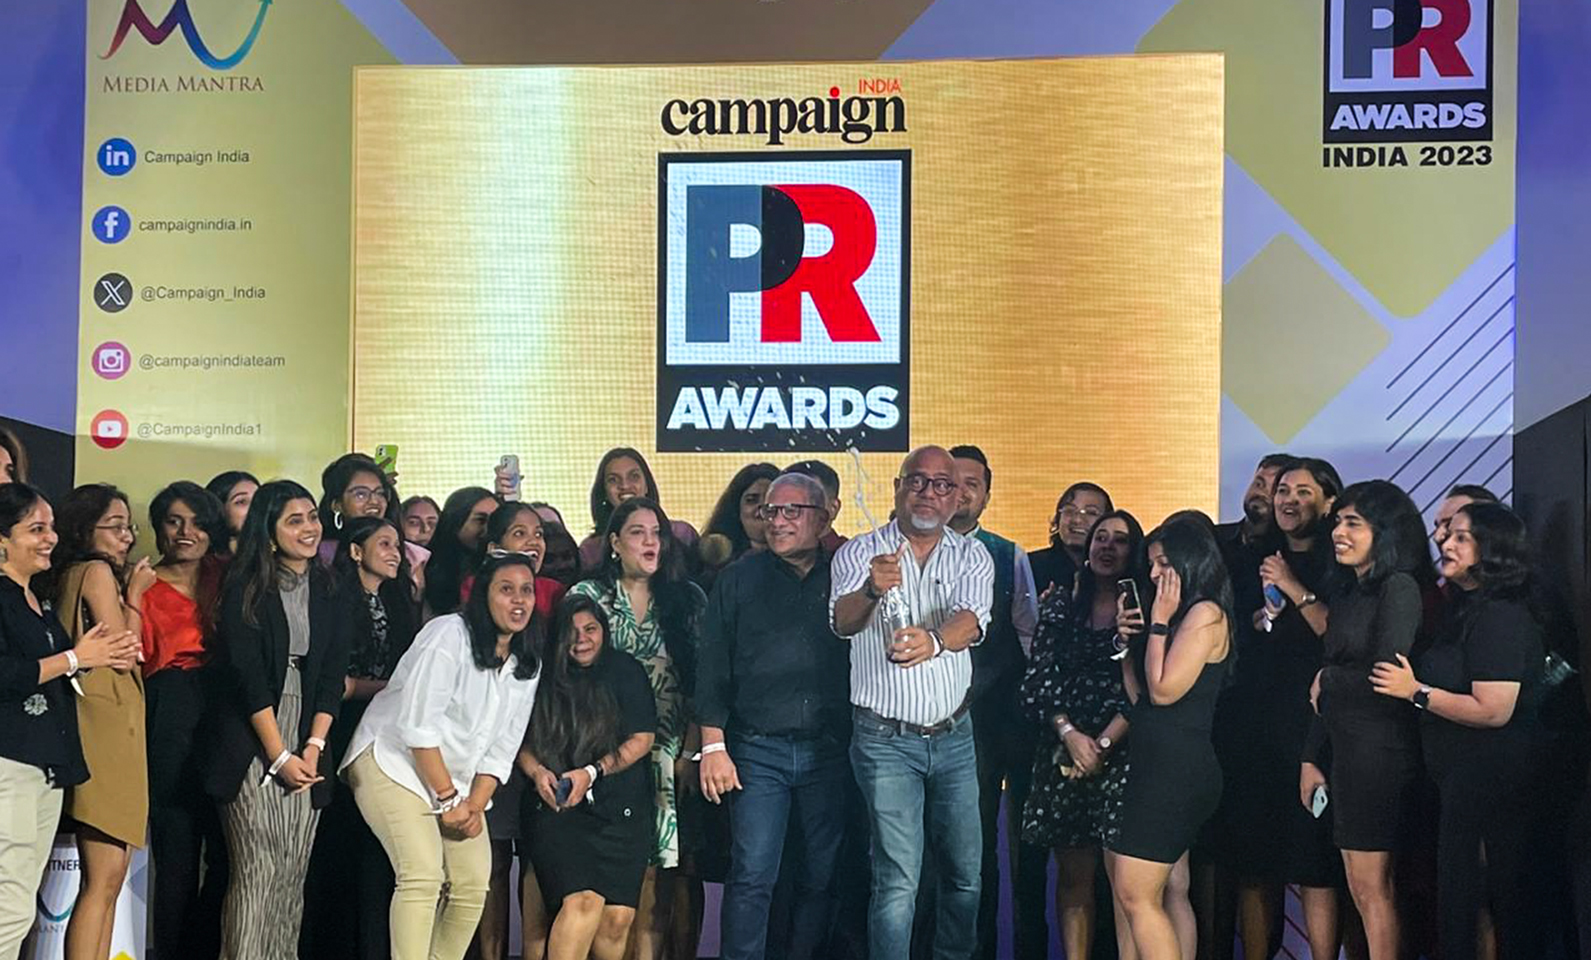 MSL India team on stage at 2023 Campaign PR Awards India